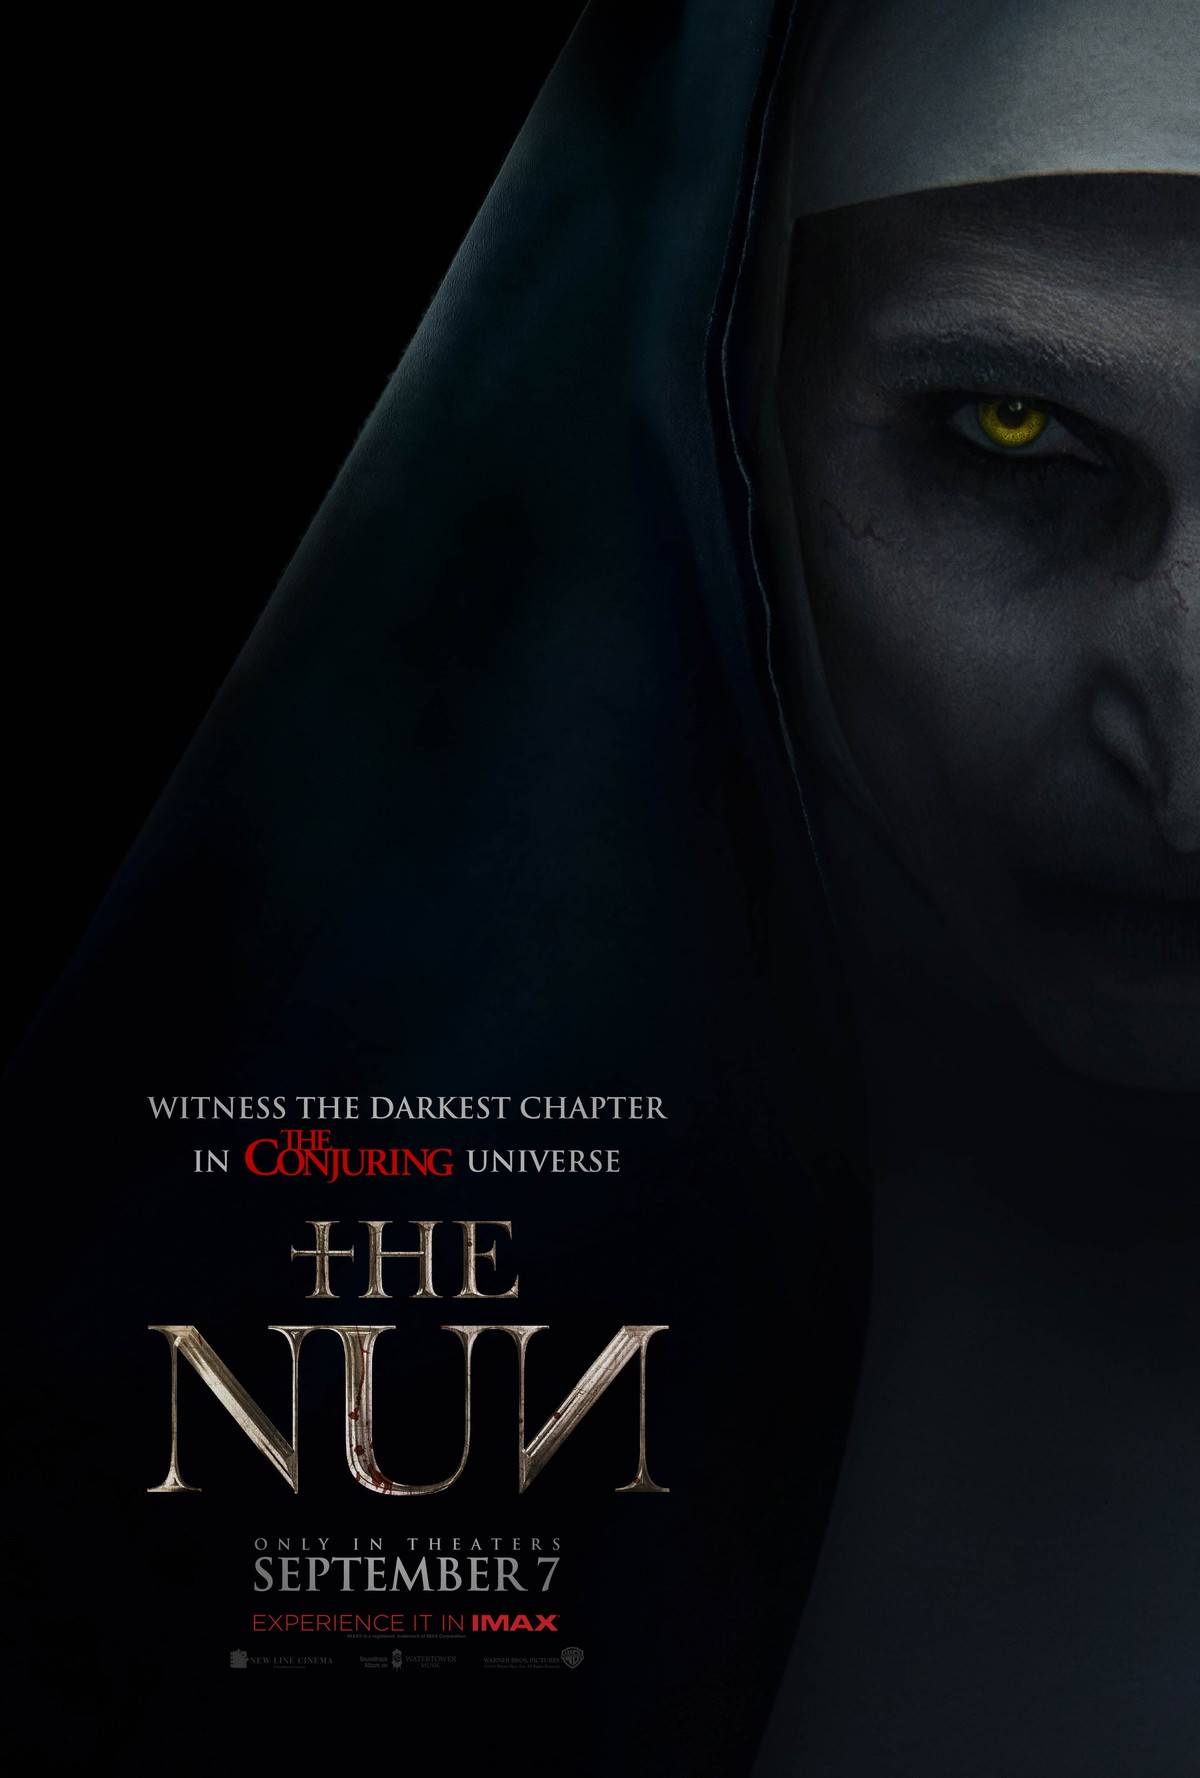 THE NUN trailer is way creepier than that Blues Brothers nun!